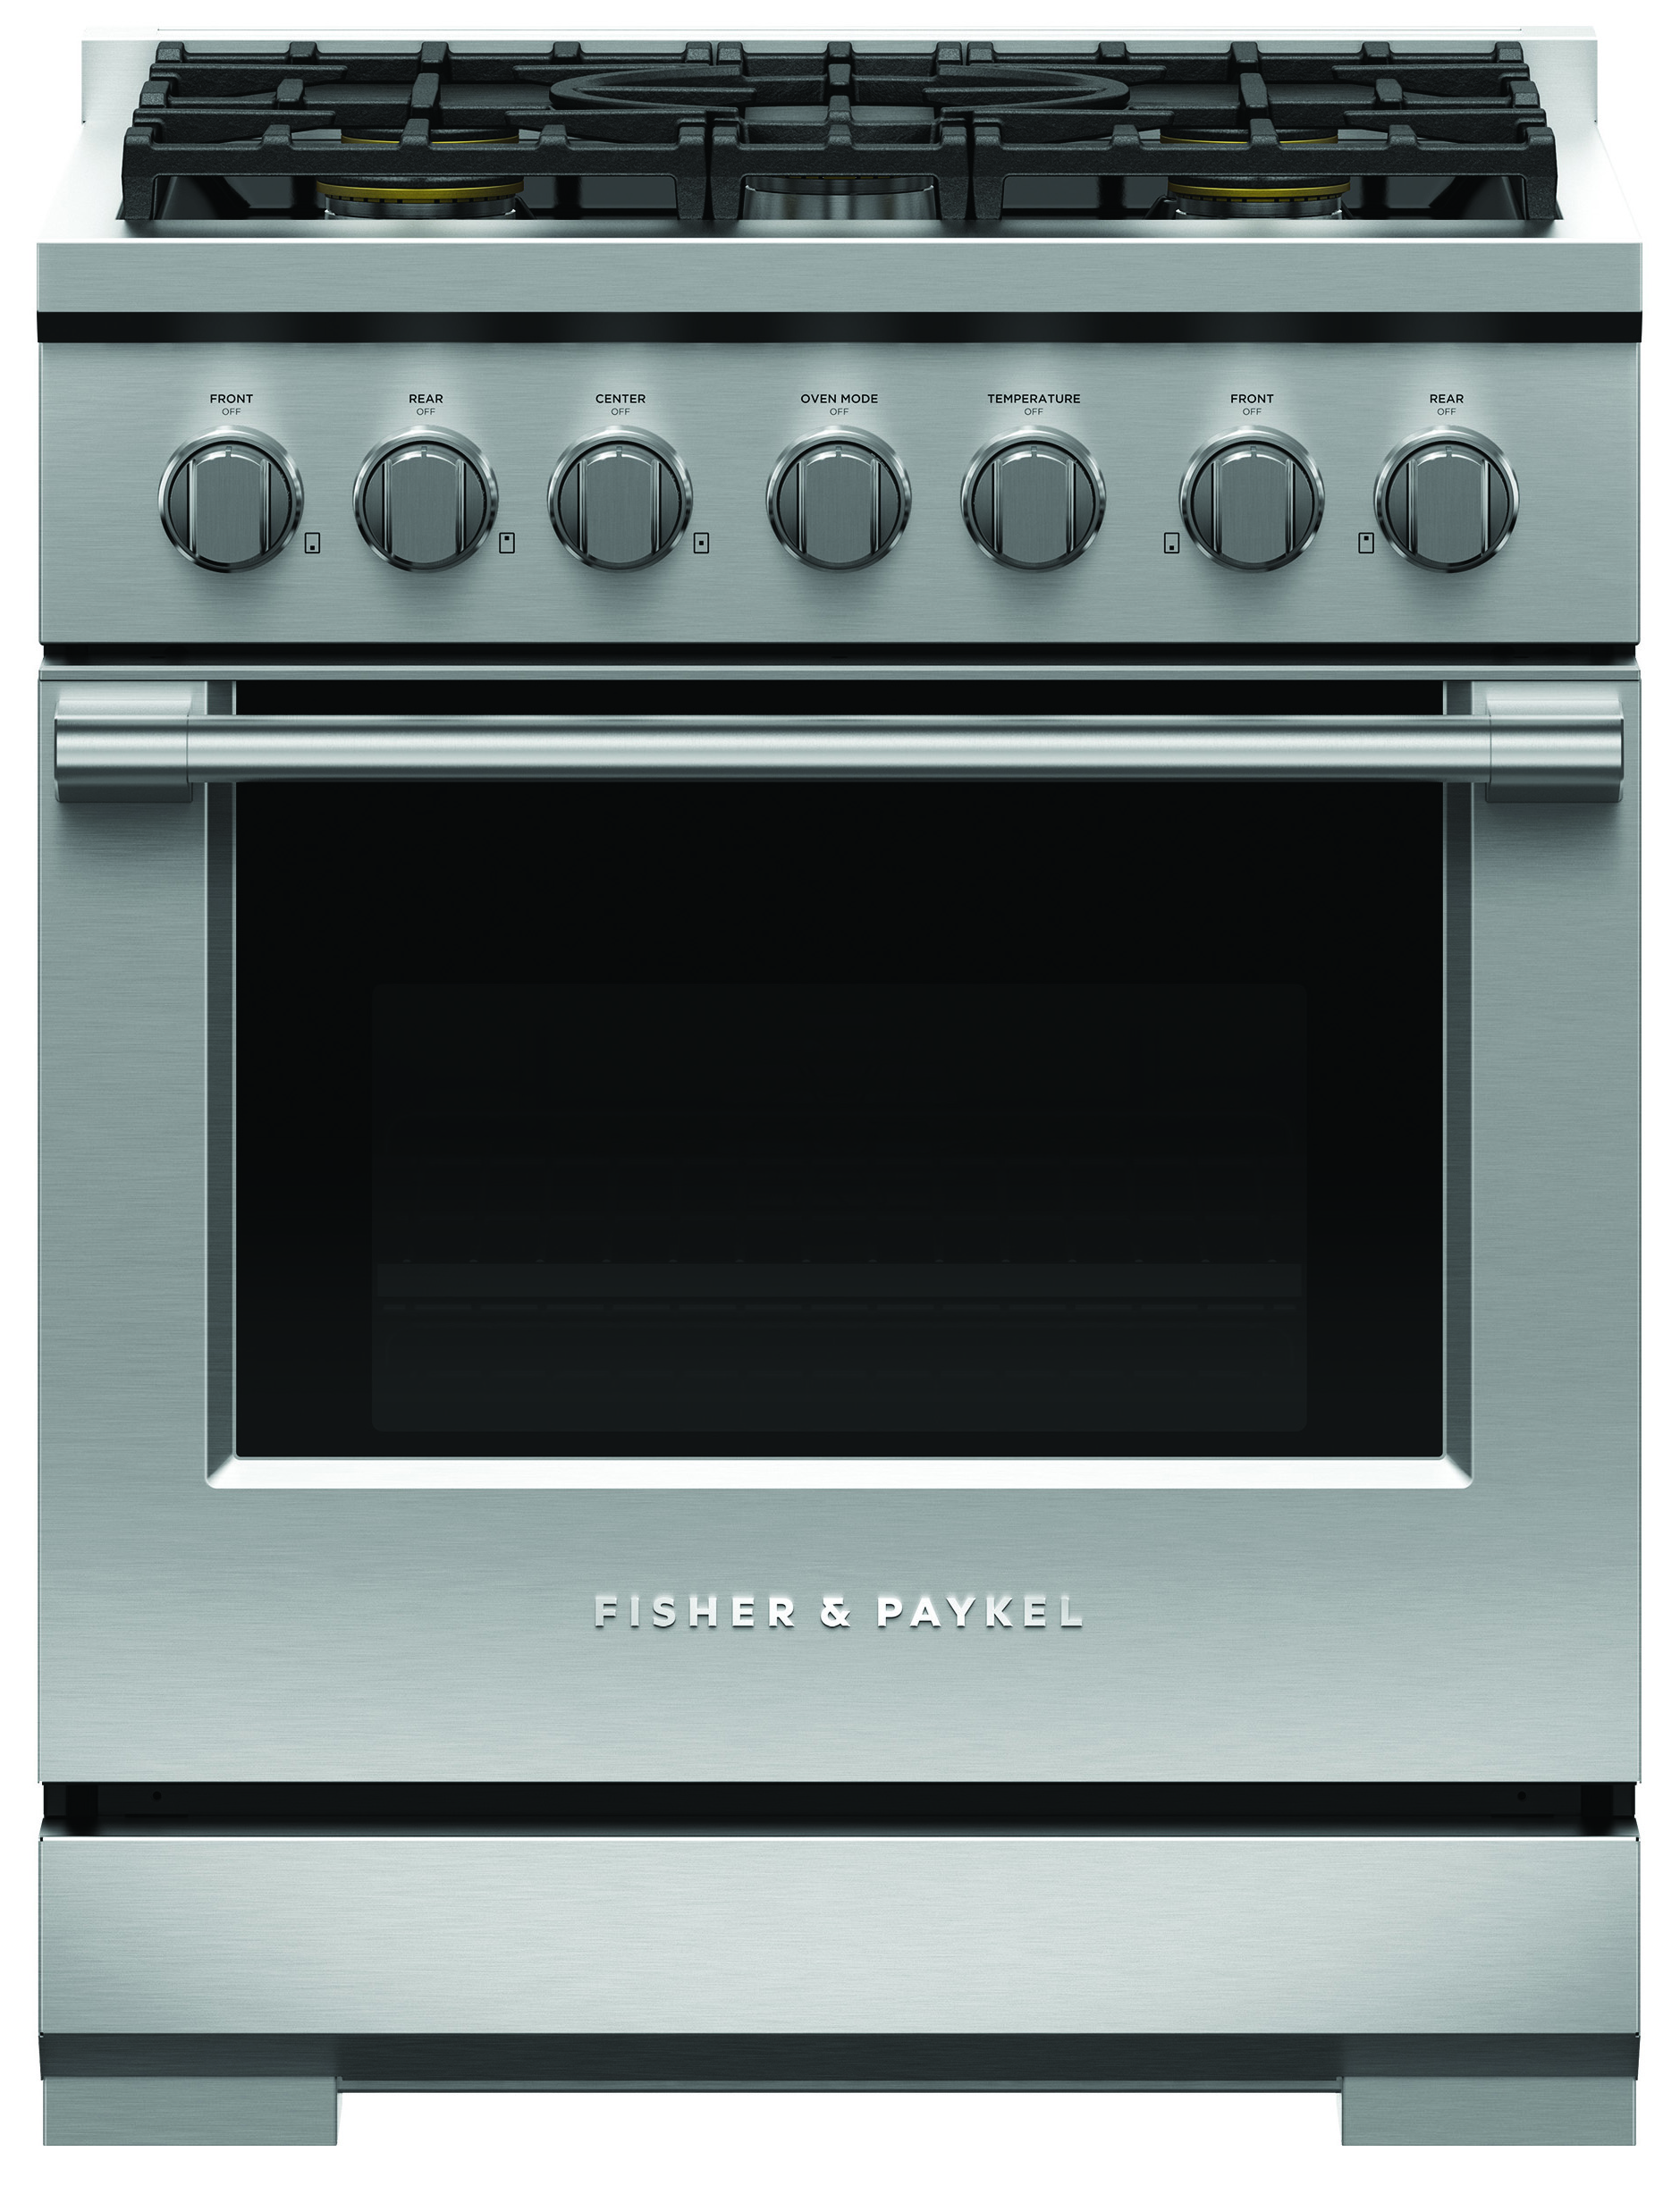  Fisher&Paykel RGV3-305-L